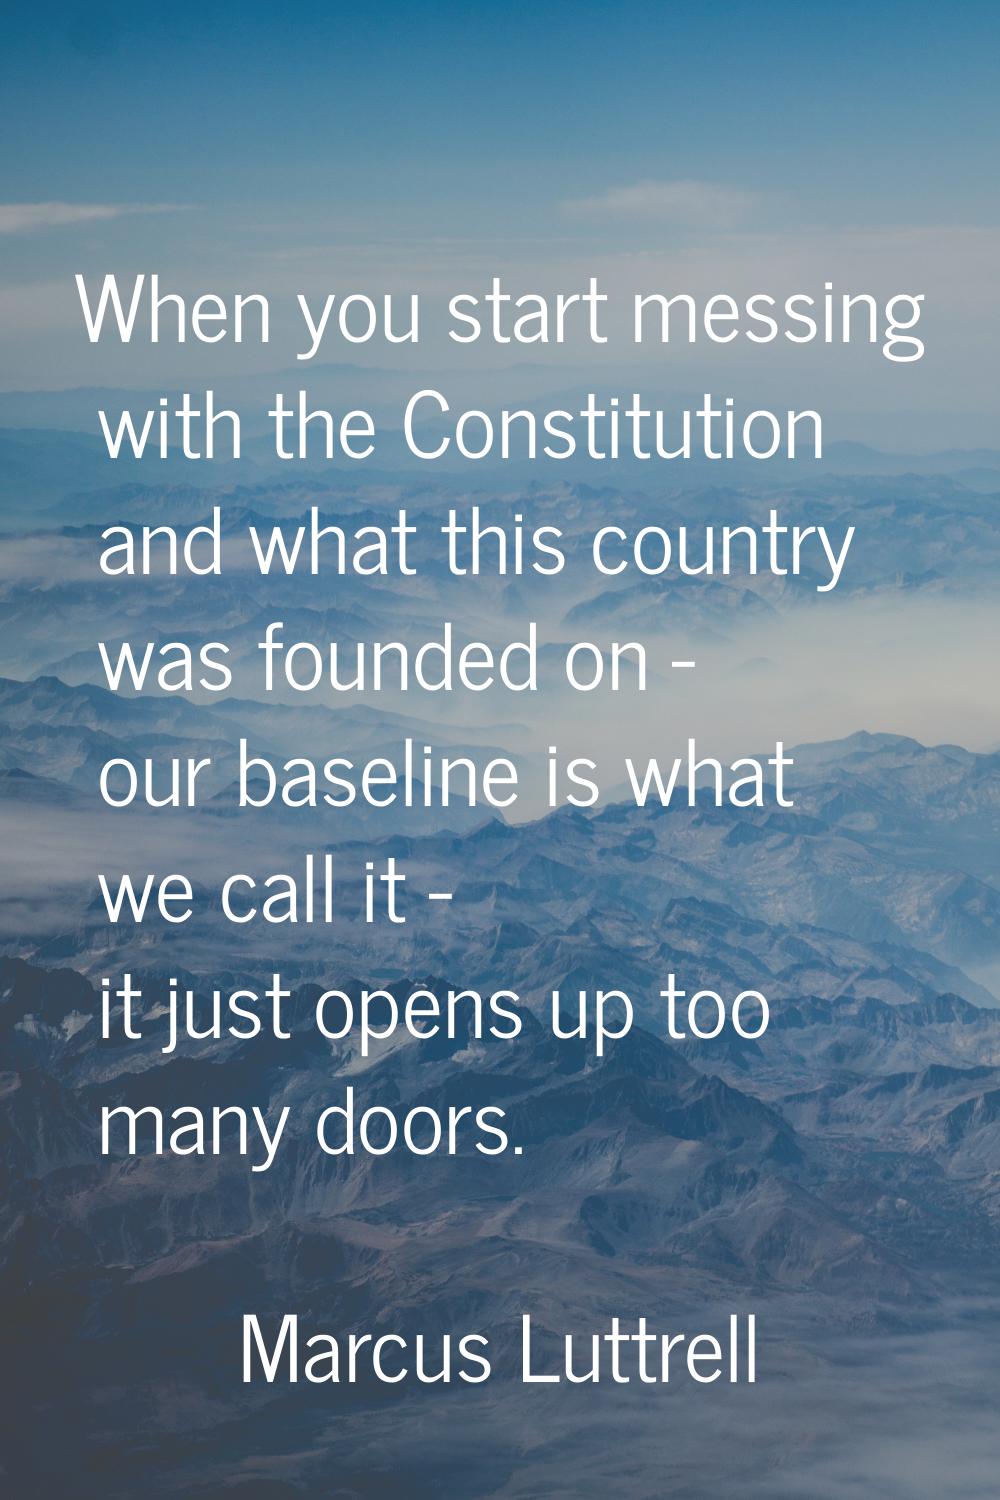 When you start messing with the Constitution and what this country was founded on - our baseline is